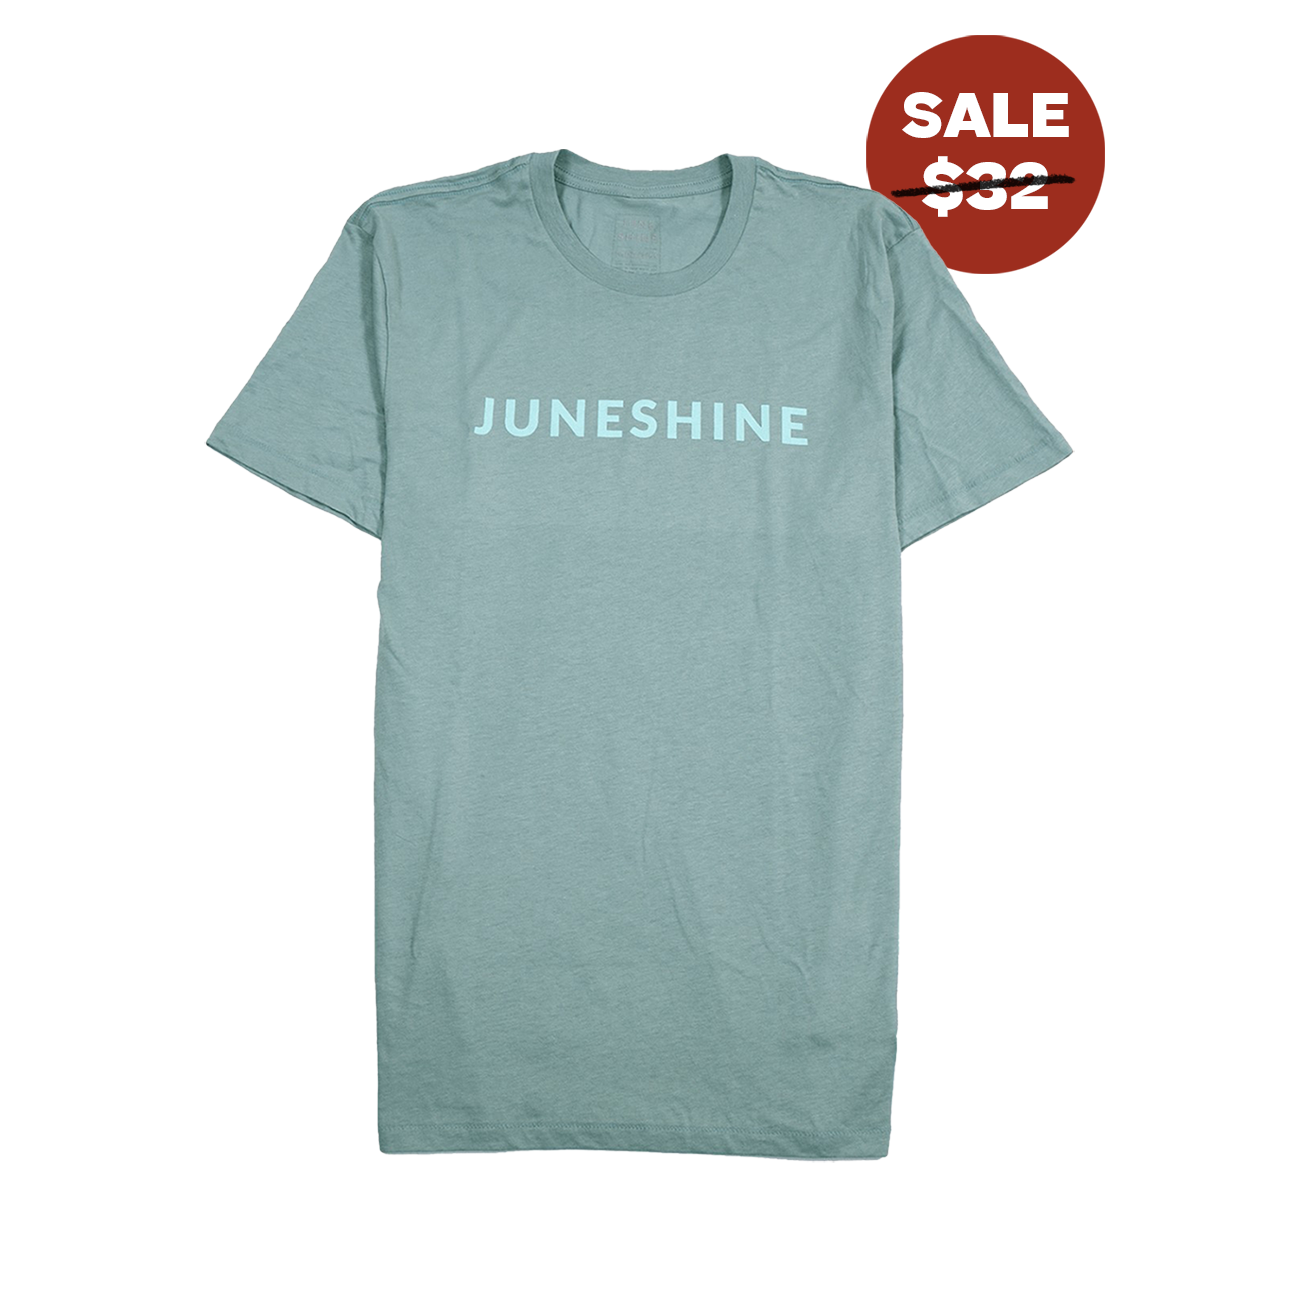 Teal short sleeve shirt that reads: june shine across the front. 